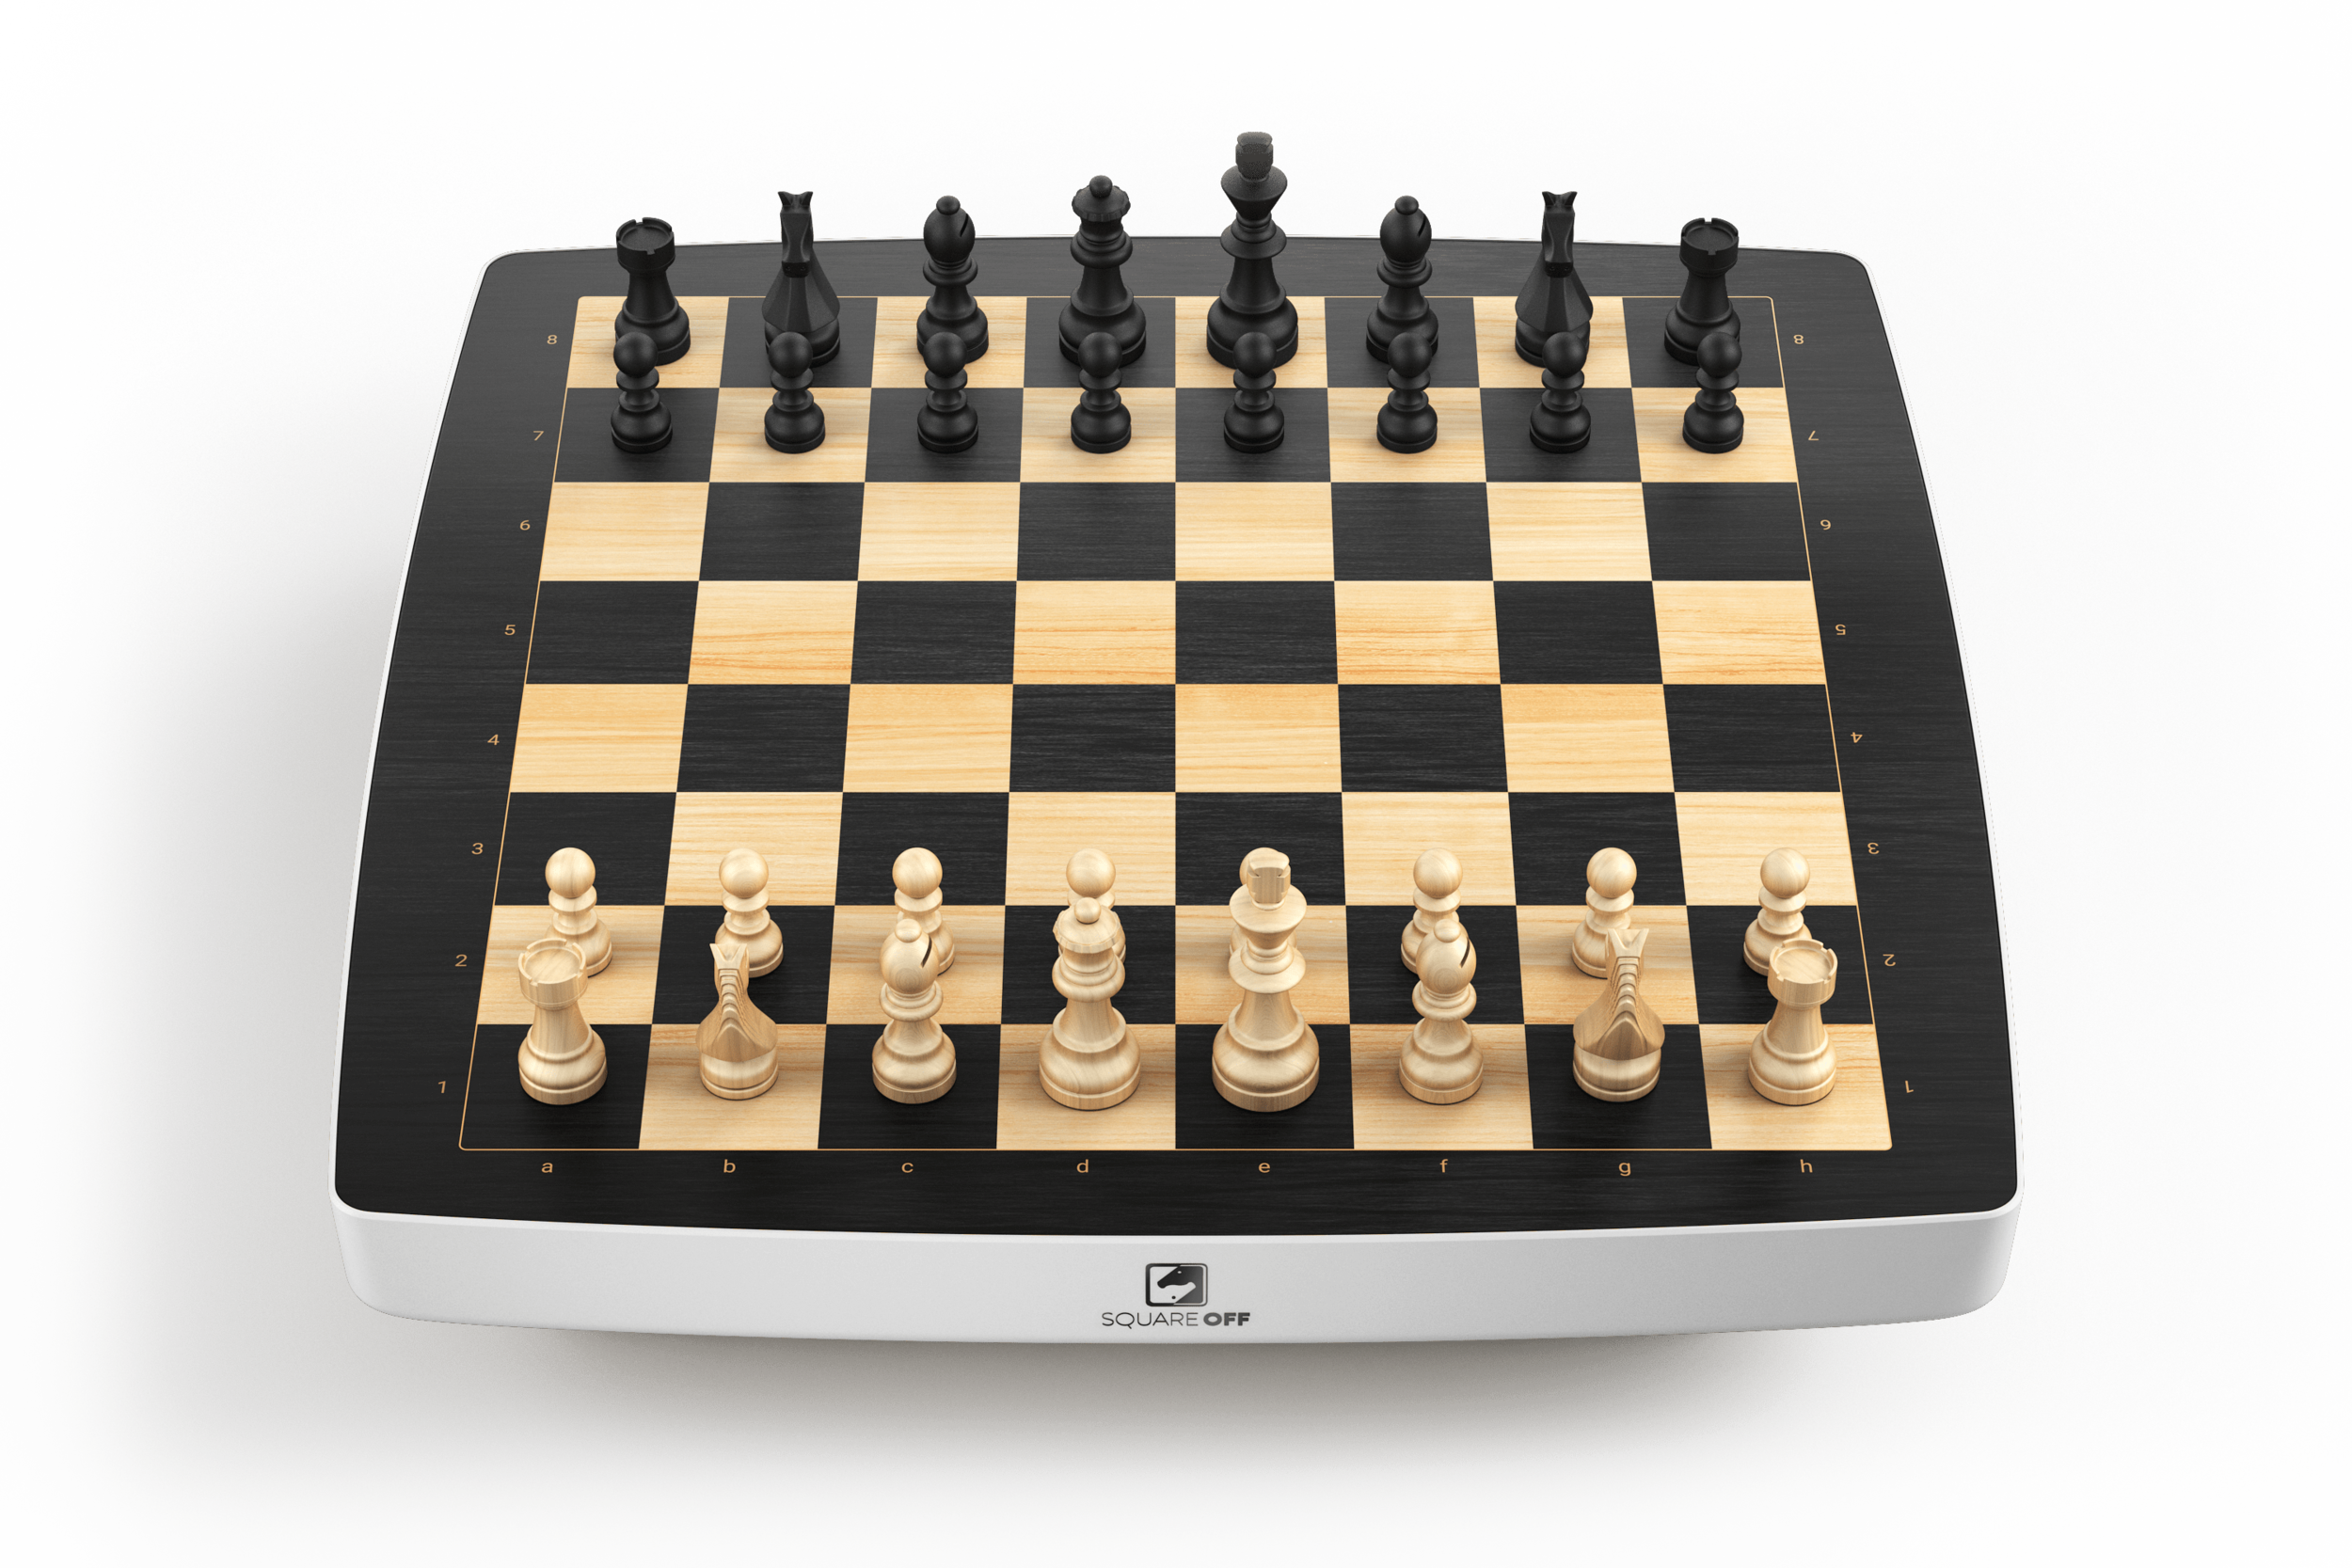 Square Off - World's Smartest Chess Board by InfiVention